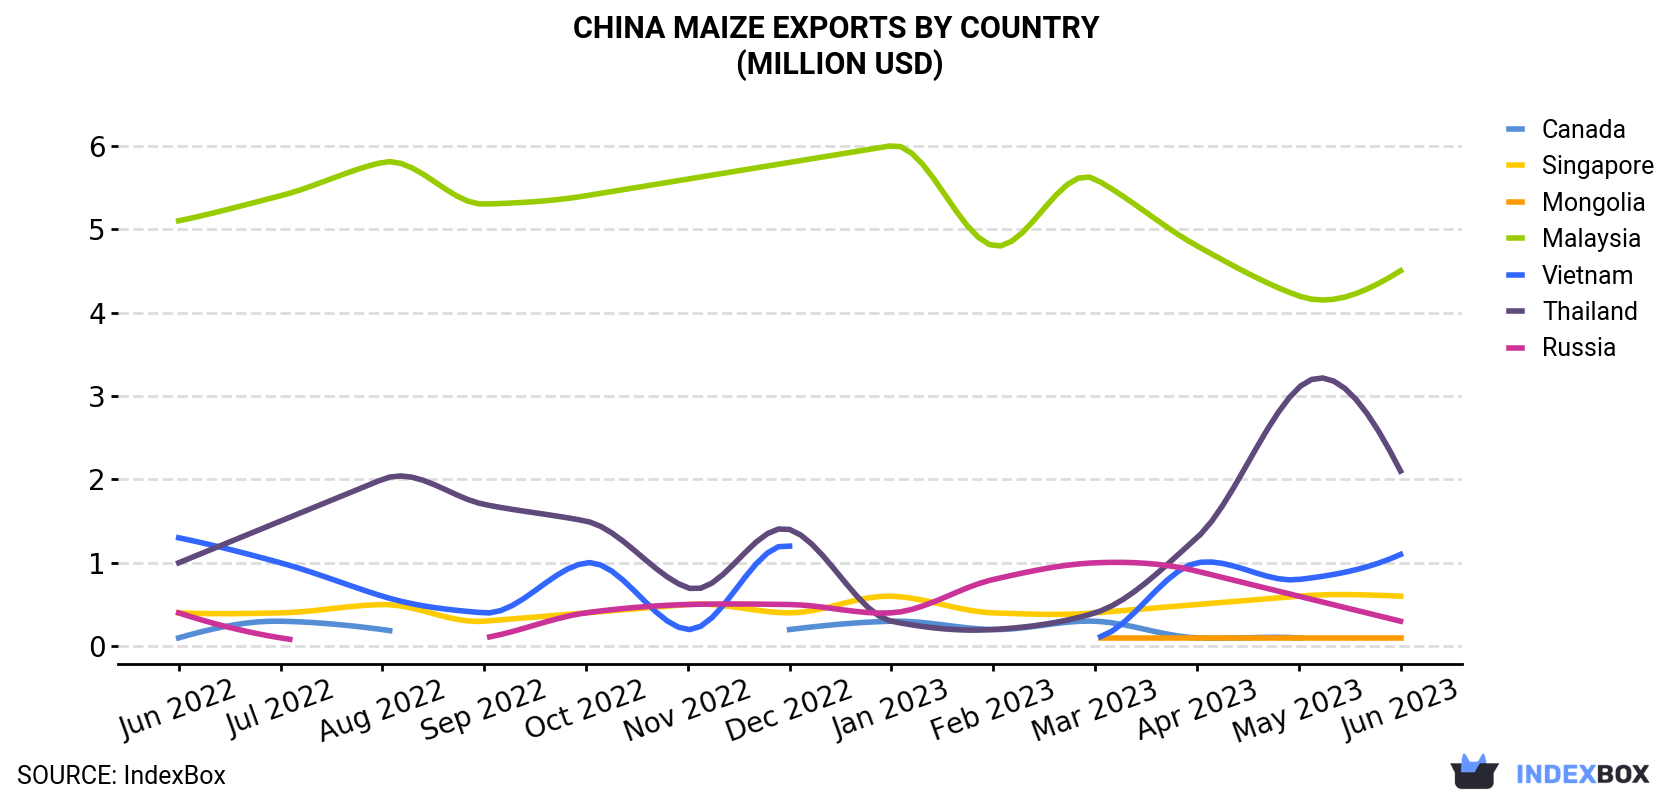 China Maize Exports By Country (Million USD)